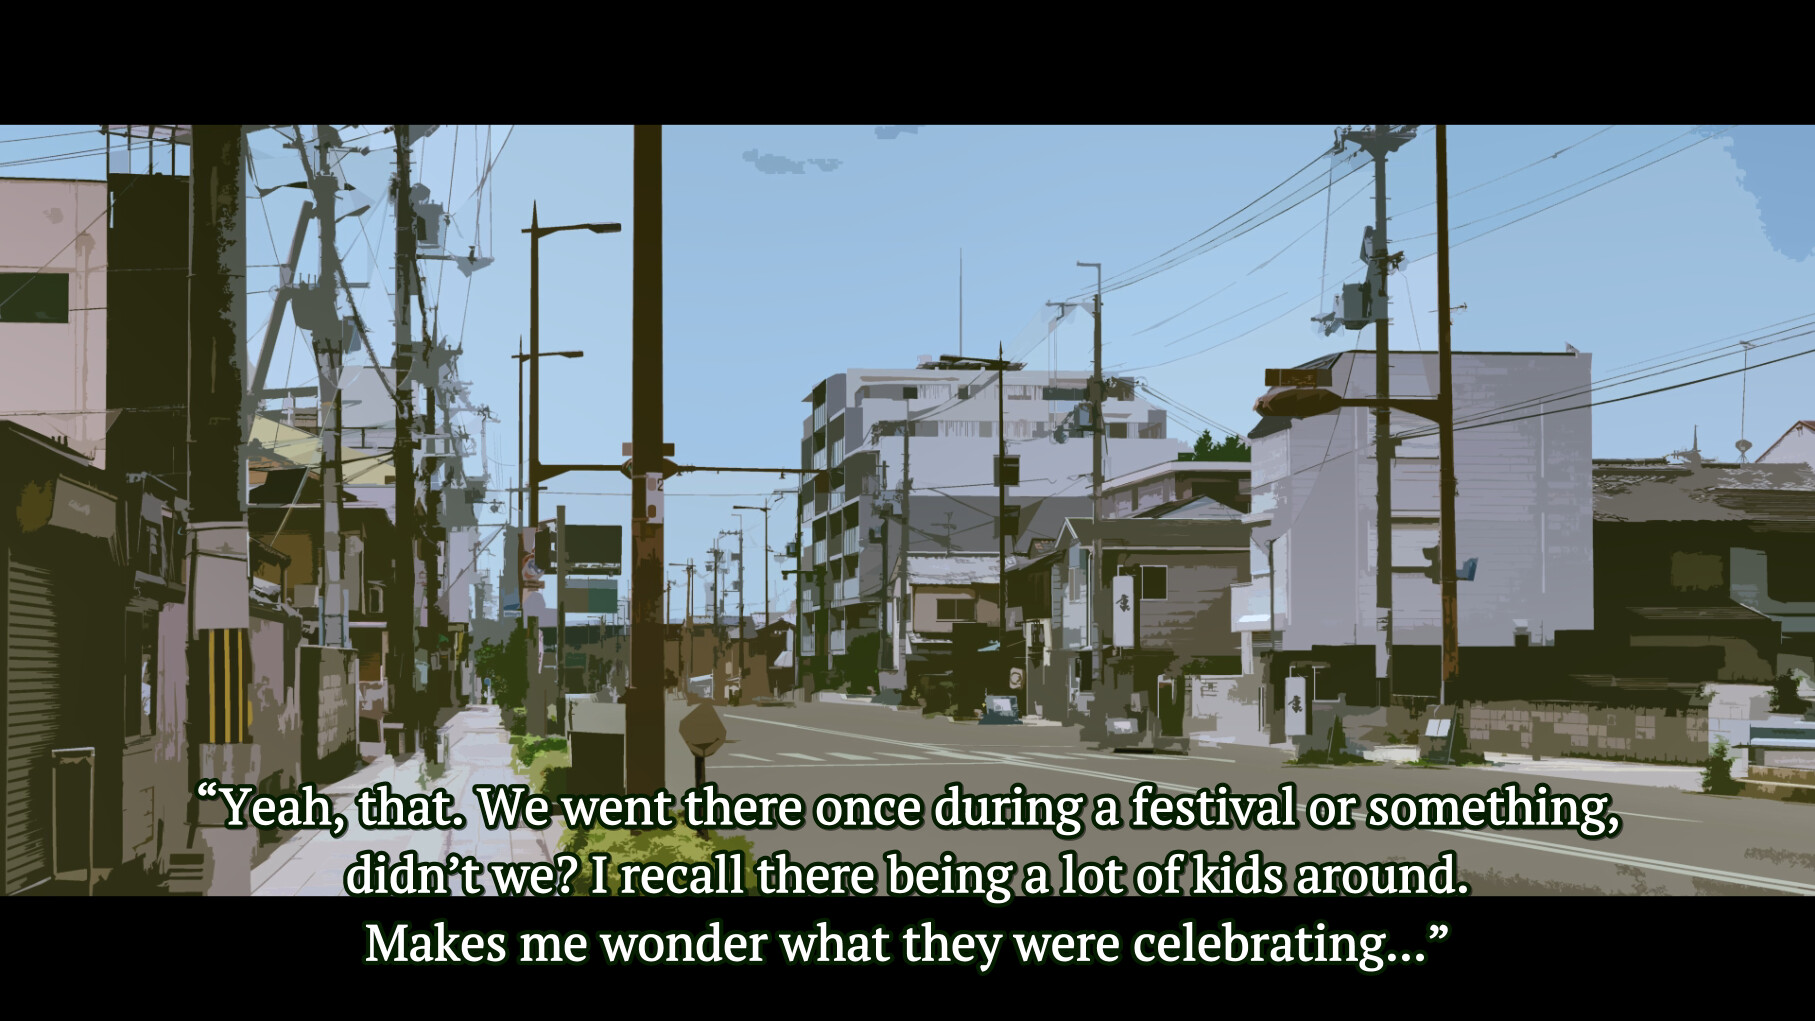 SeaBed Audio Novel Collection - Episode 2 - "Cafe and the Stone Port" Featured Screenshot #1